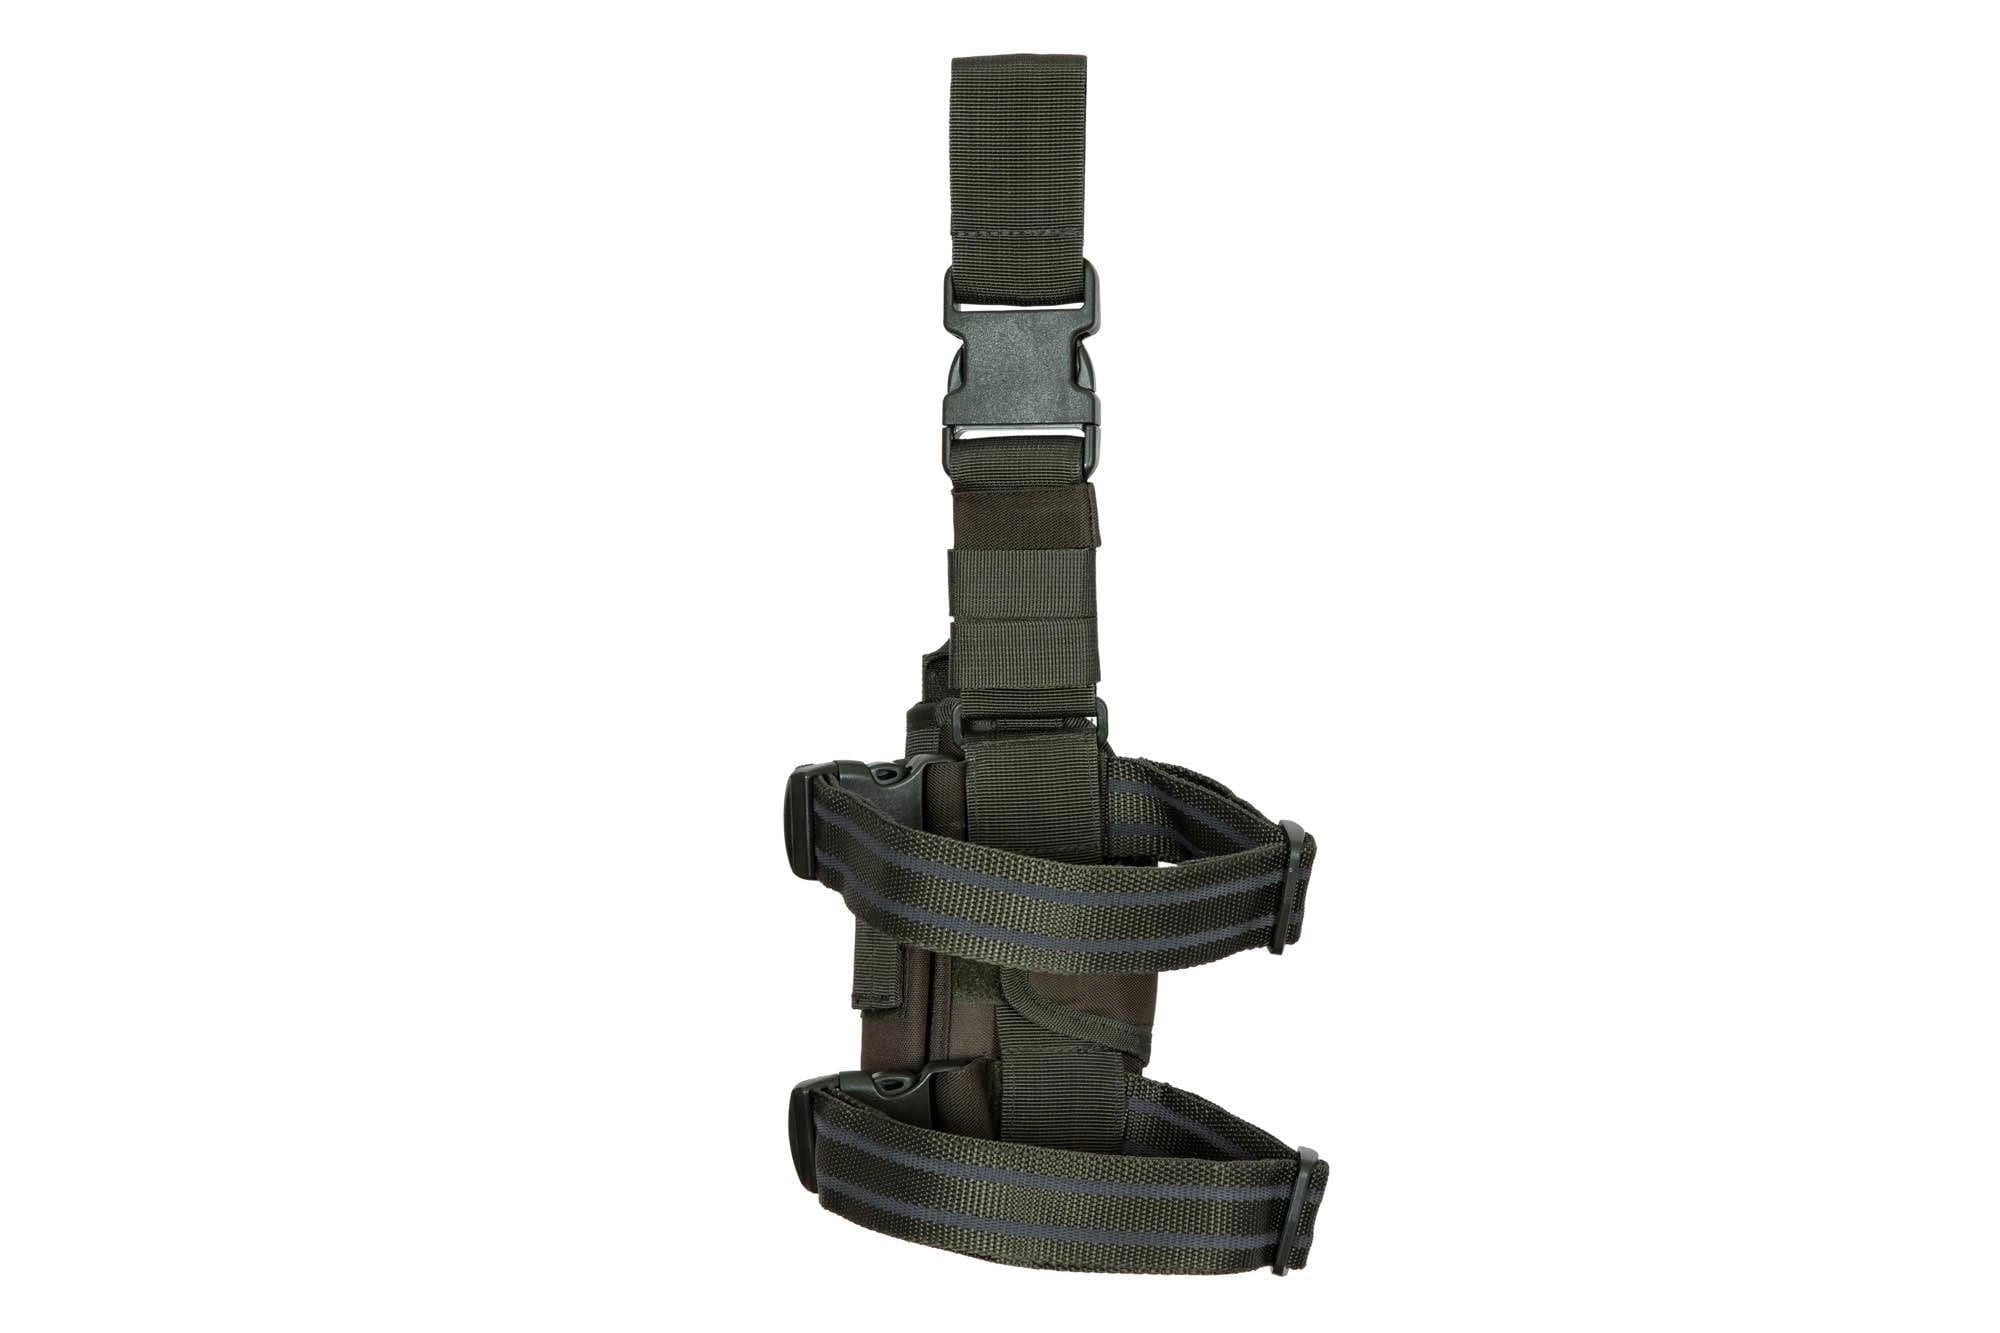 Holster universel réglable pour jambe tombante - Olive Drab